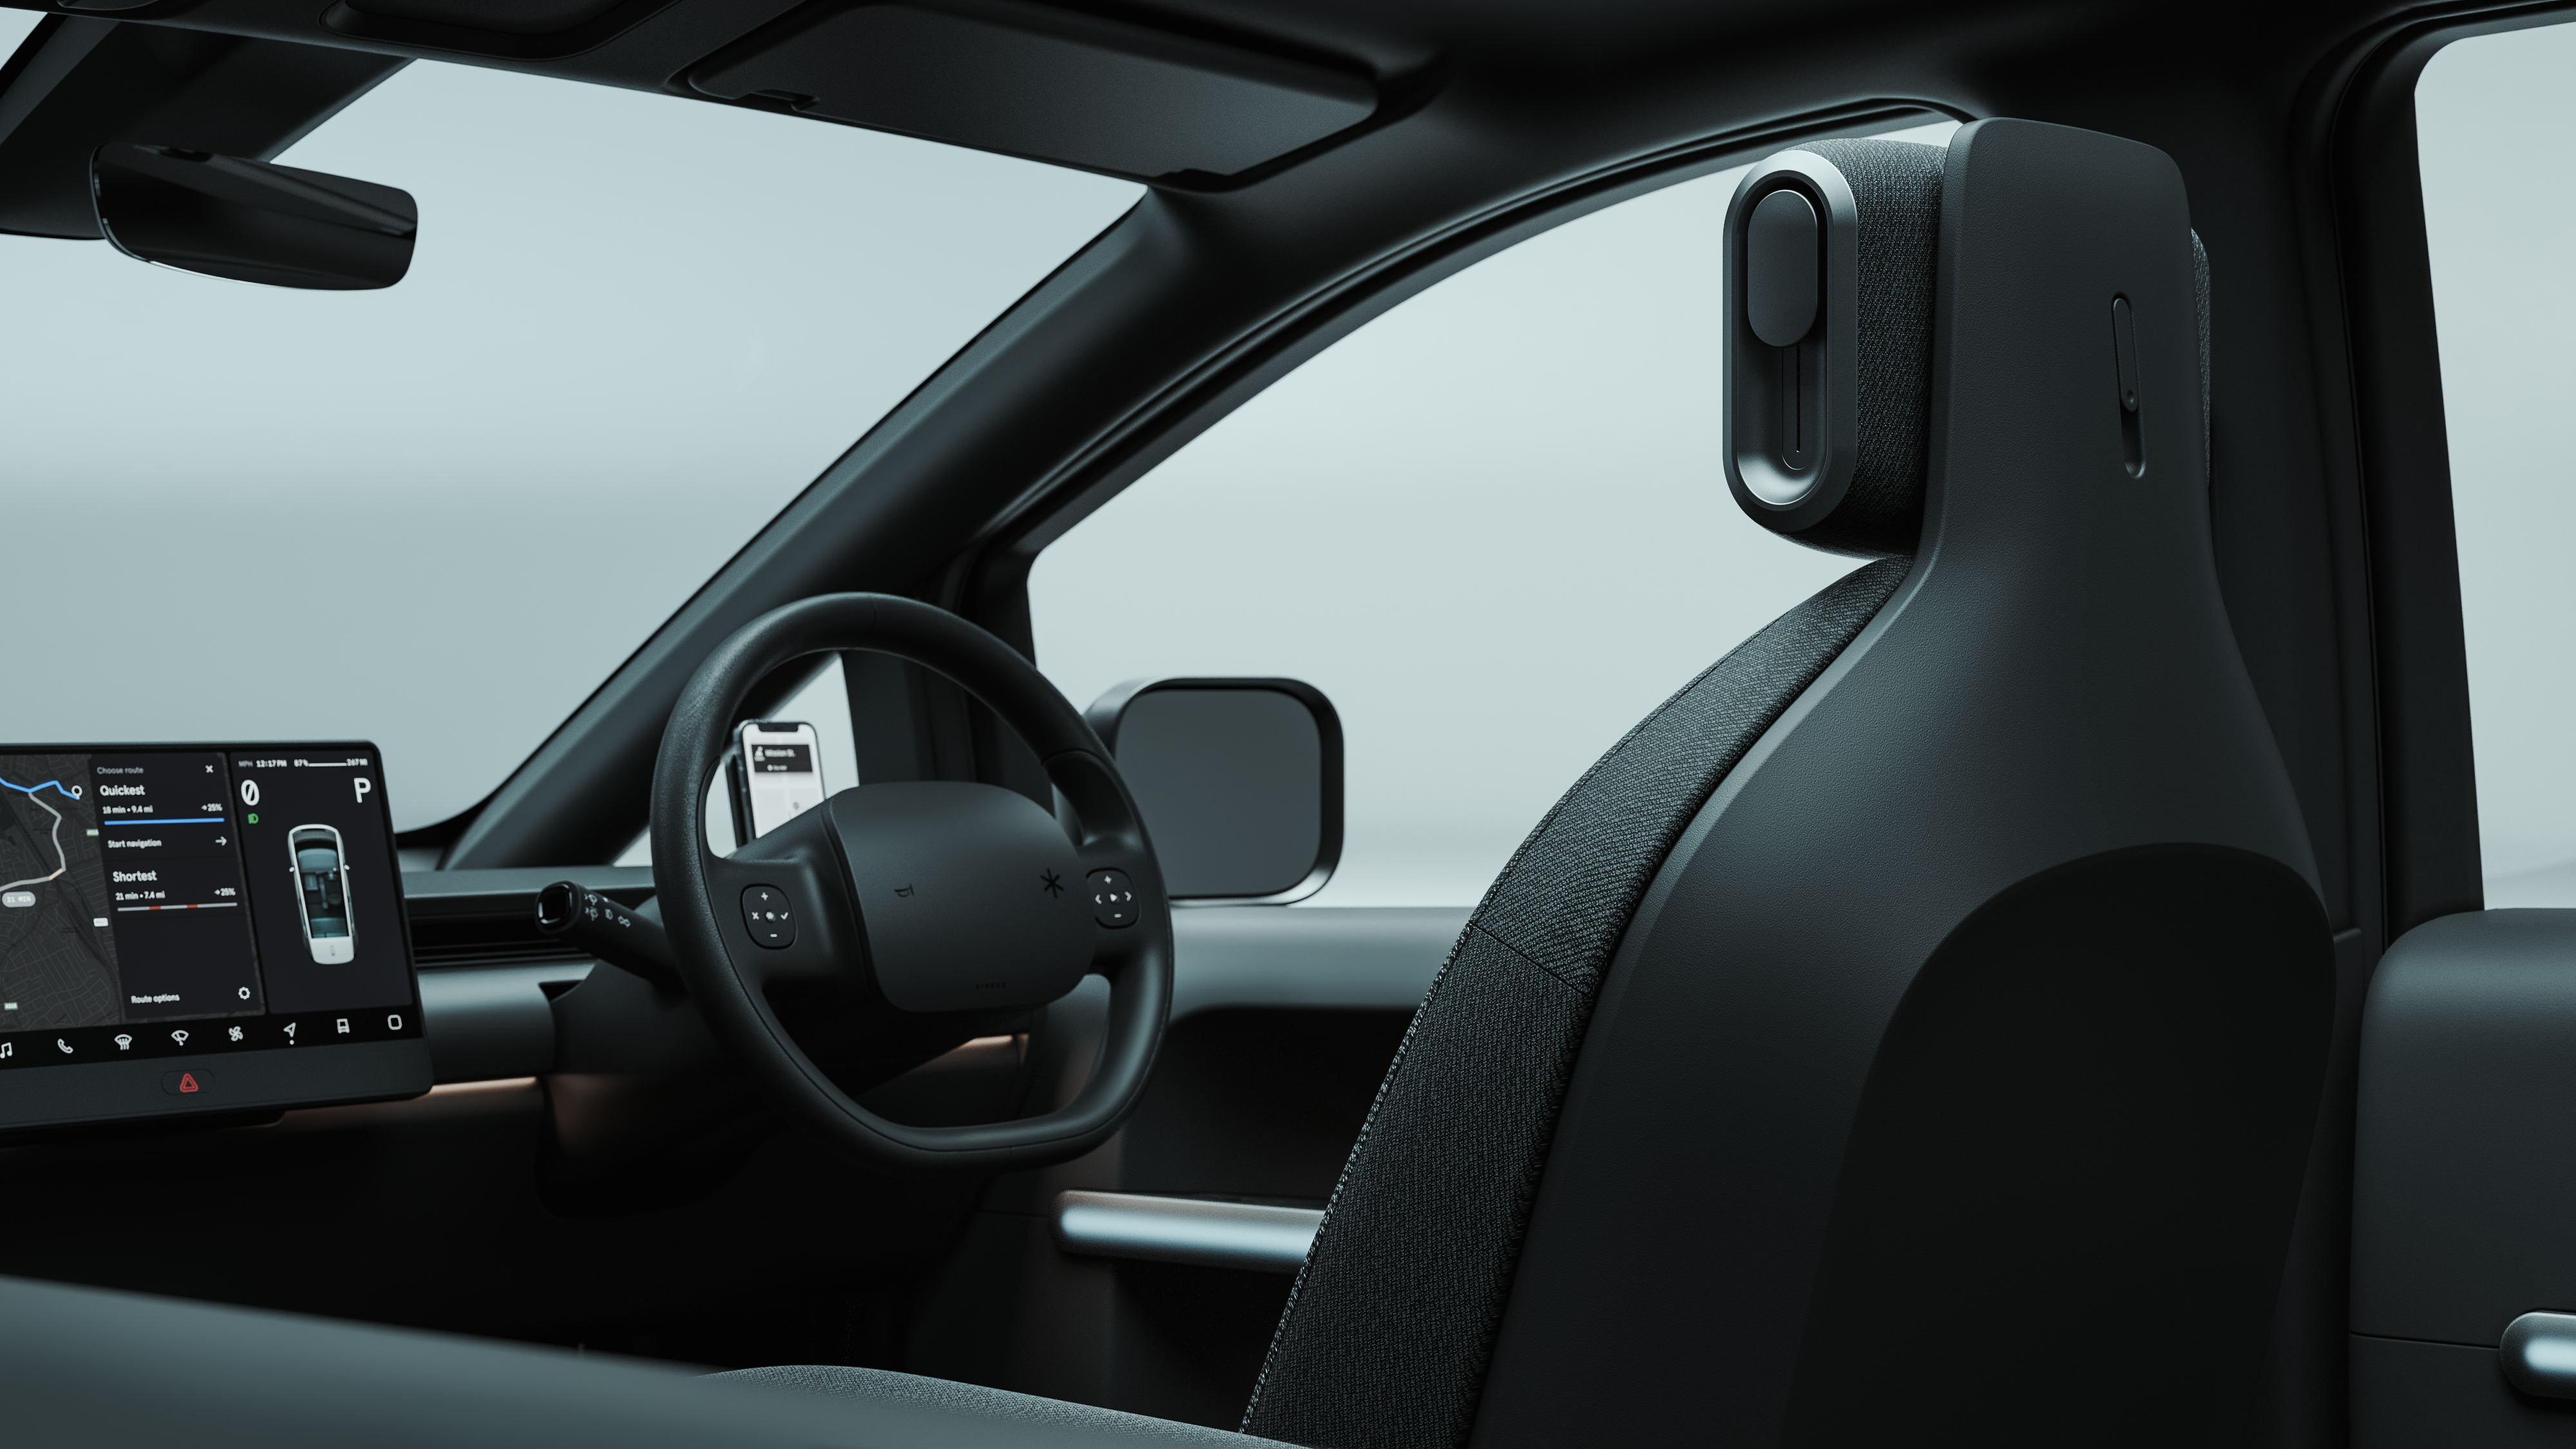 Rendering of interior of Arrival's ride-hail car showing steering wheel and touchscreen display for drivers.